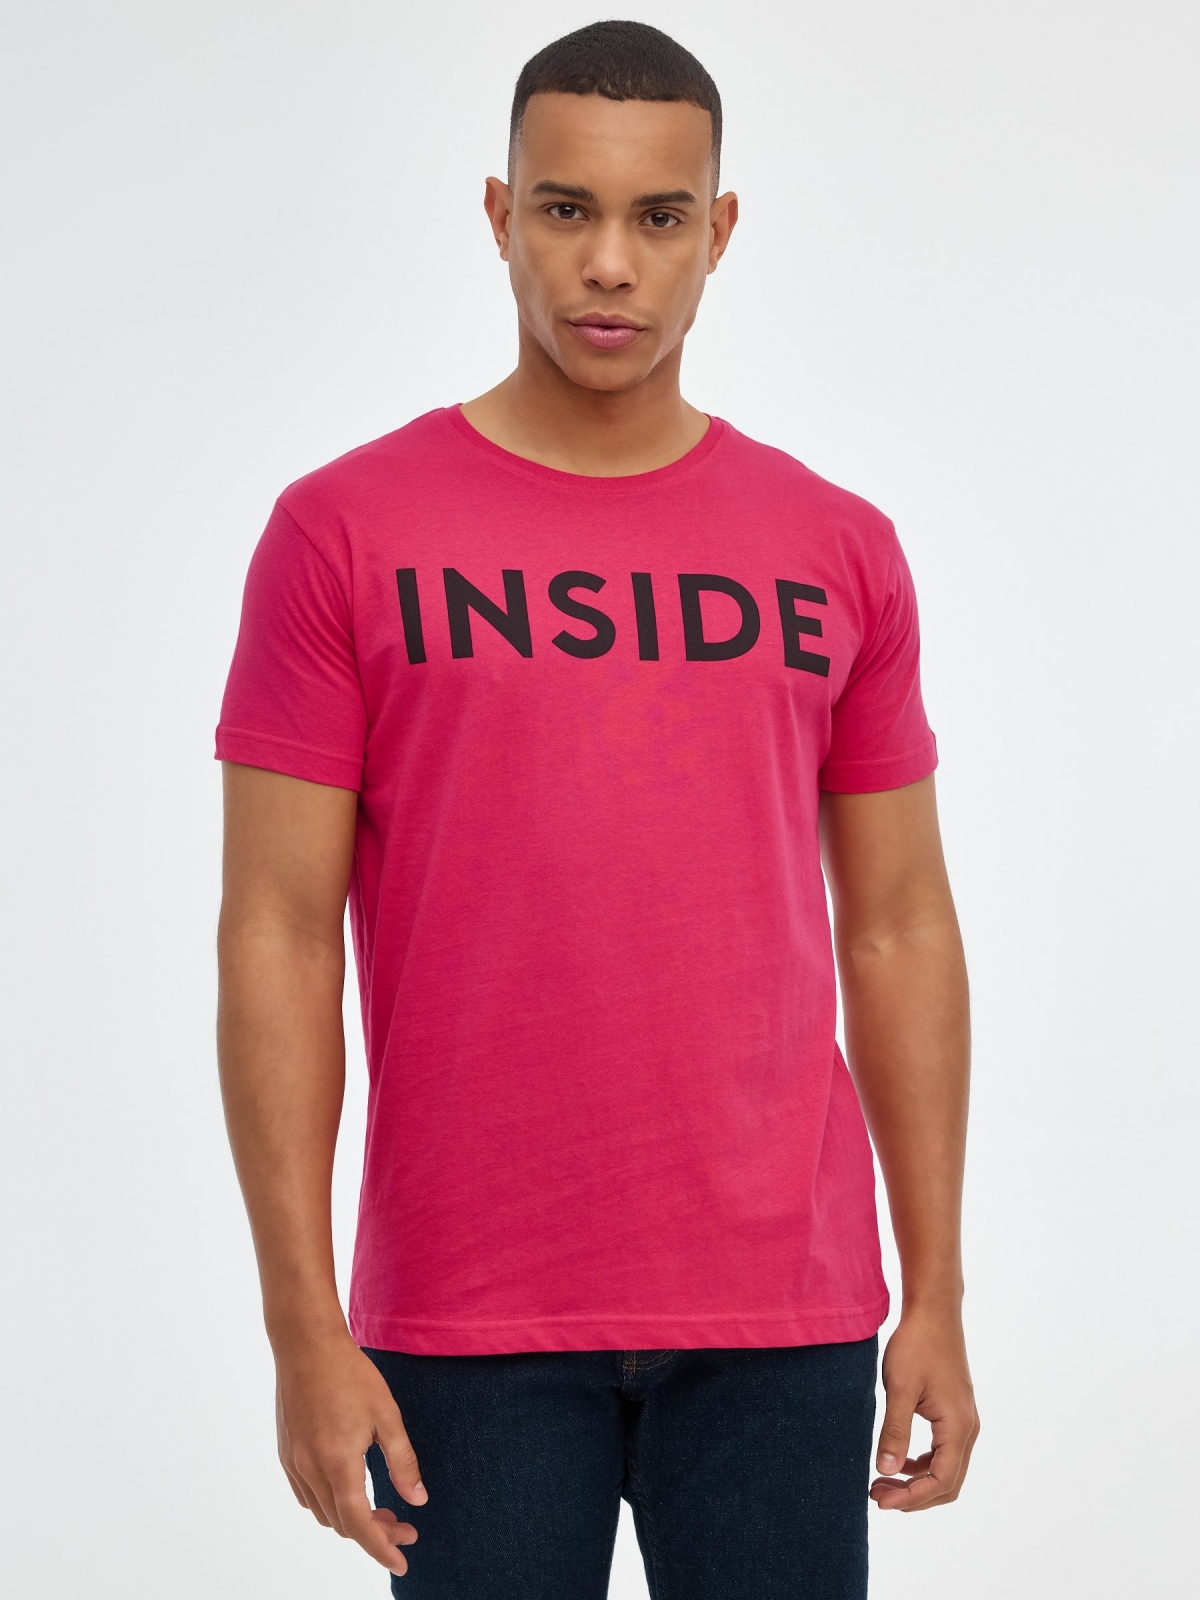 INSIDE basic T-shirt red middle front view